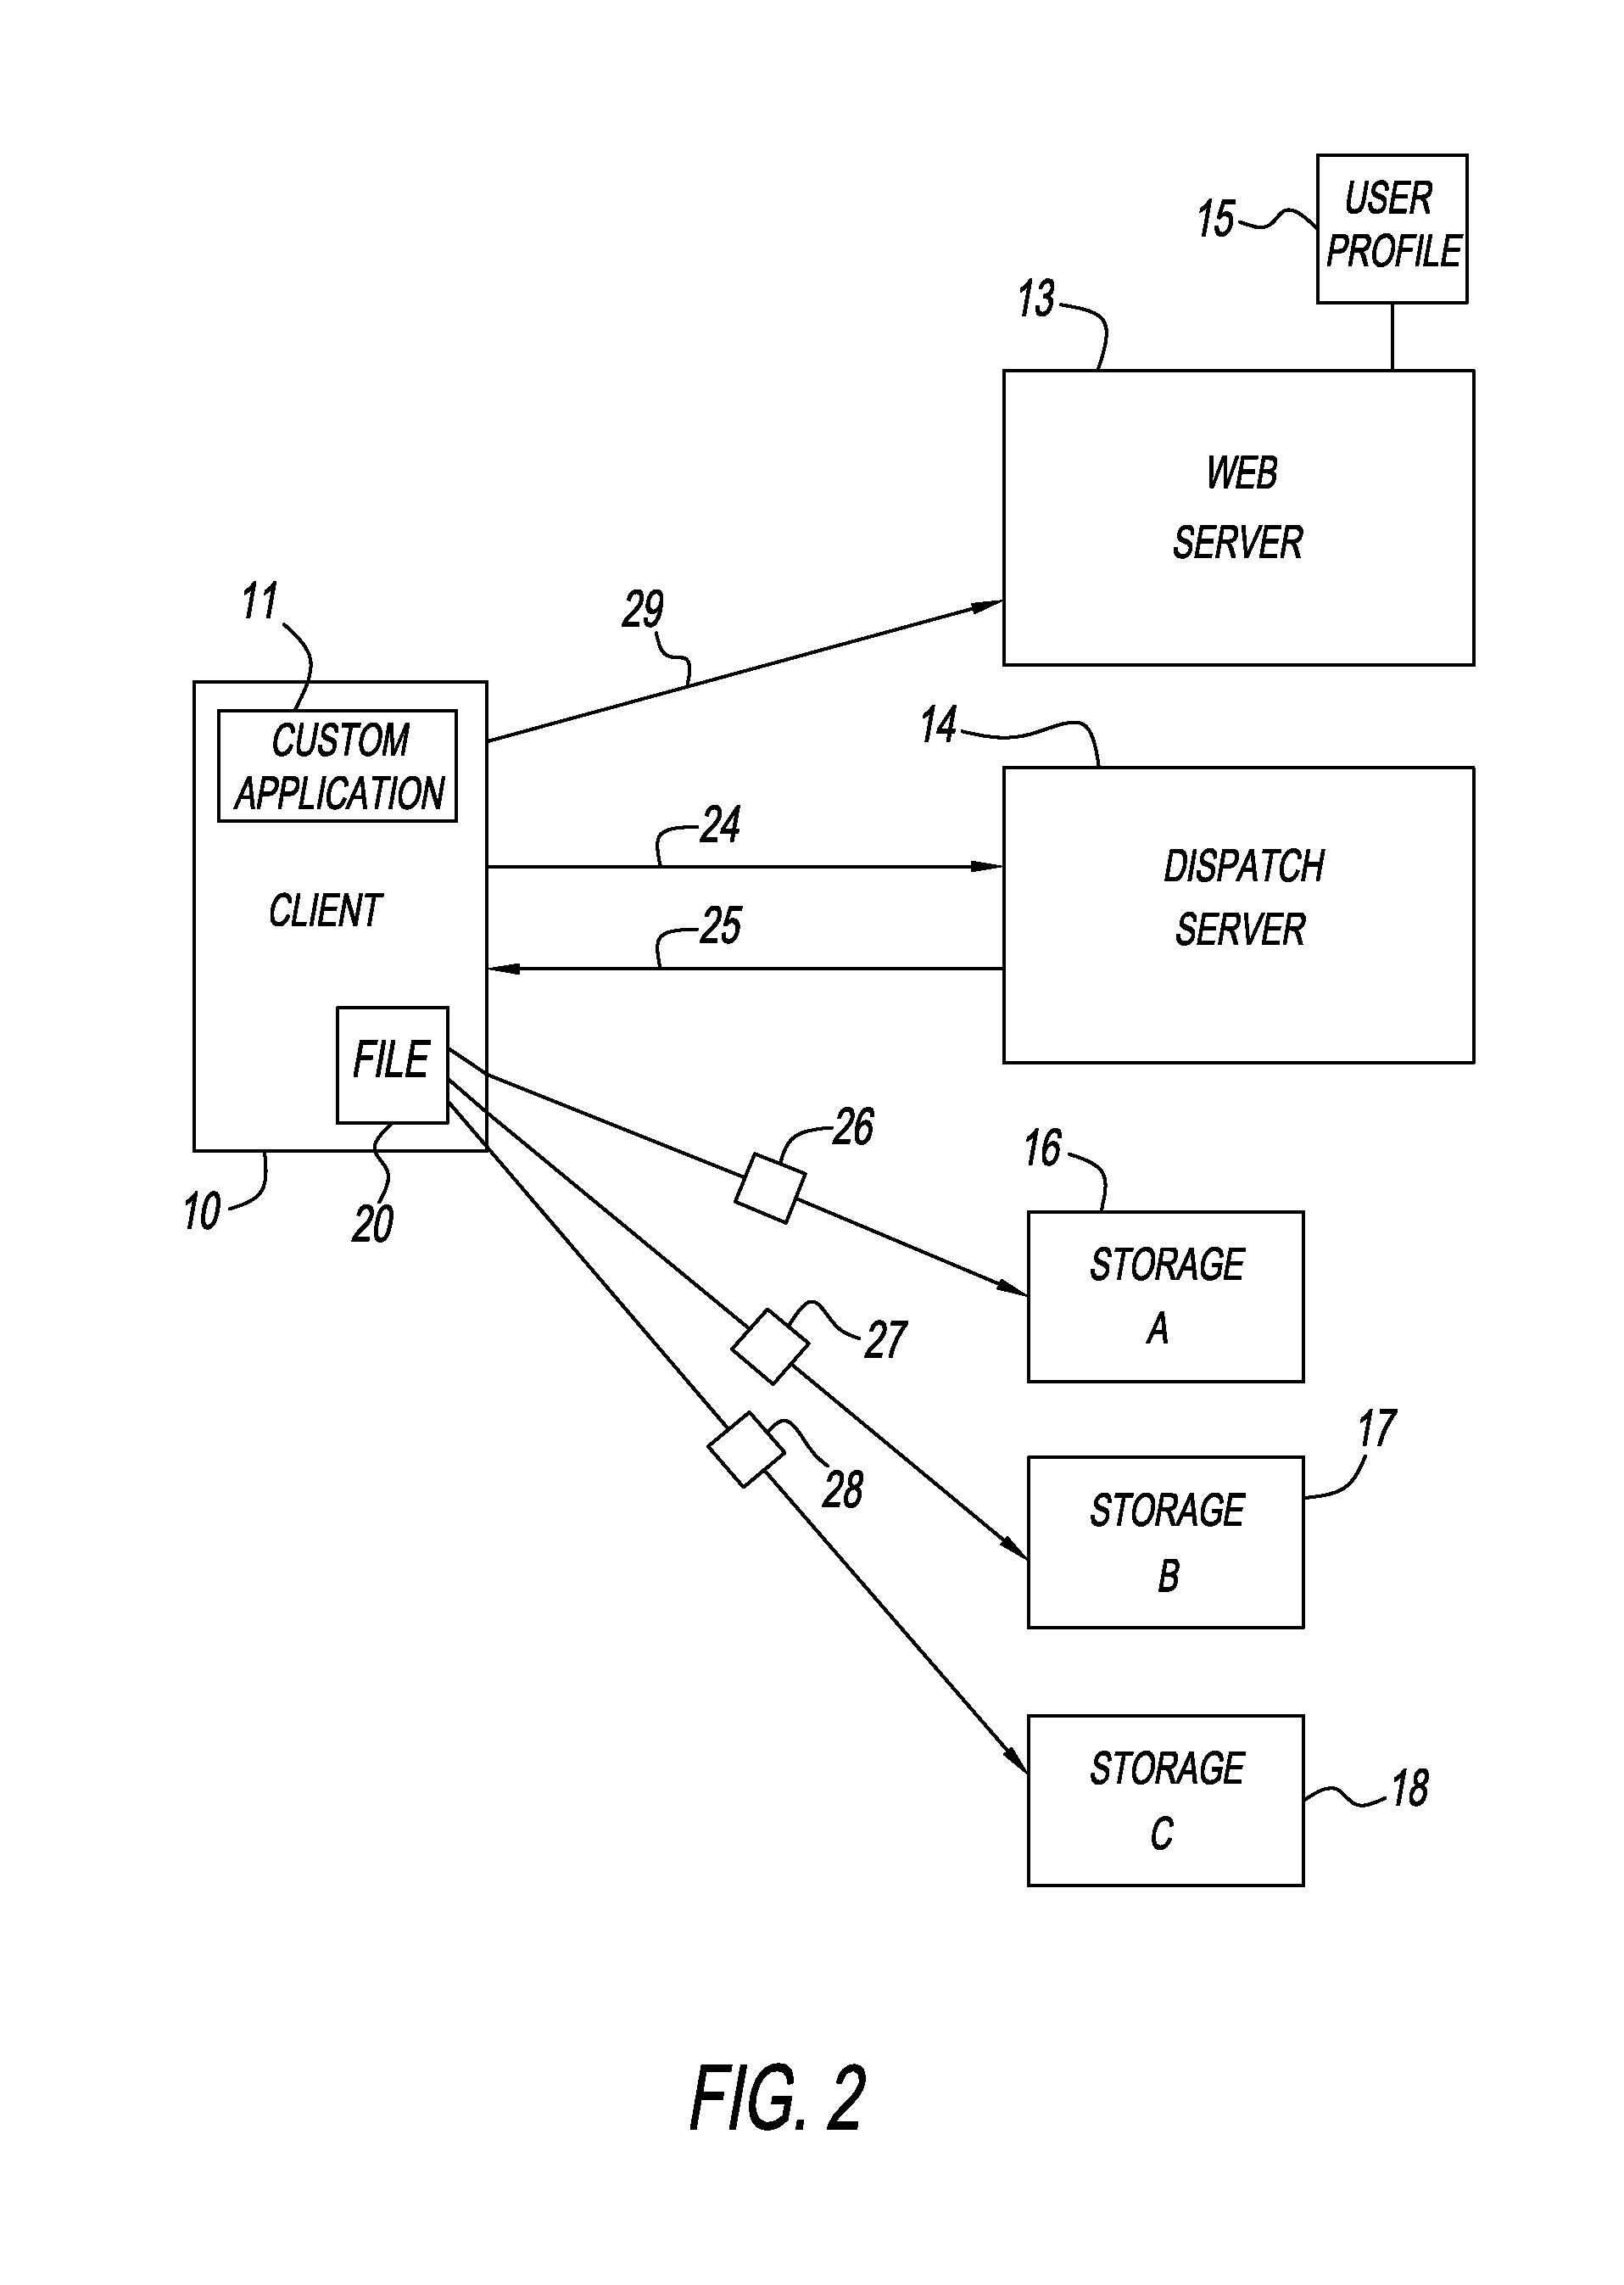 Method For Segmenting A Data File, Storing The File In A Separate Location, And Recreating The File